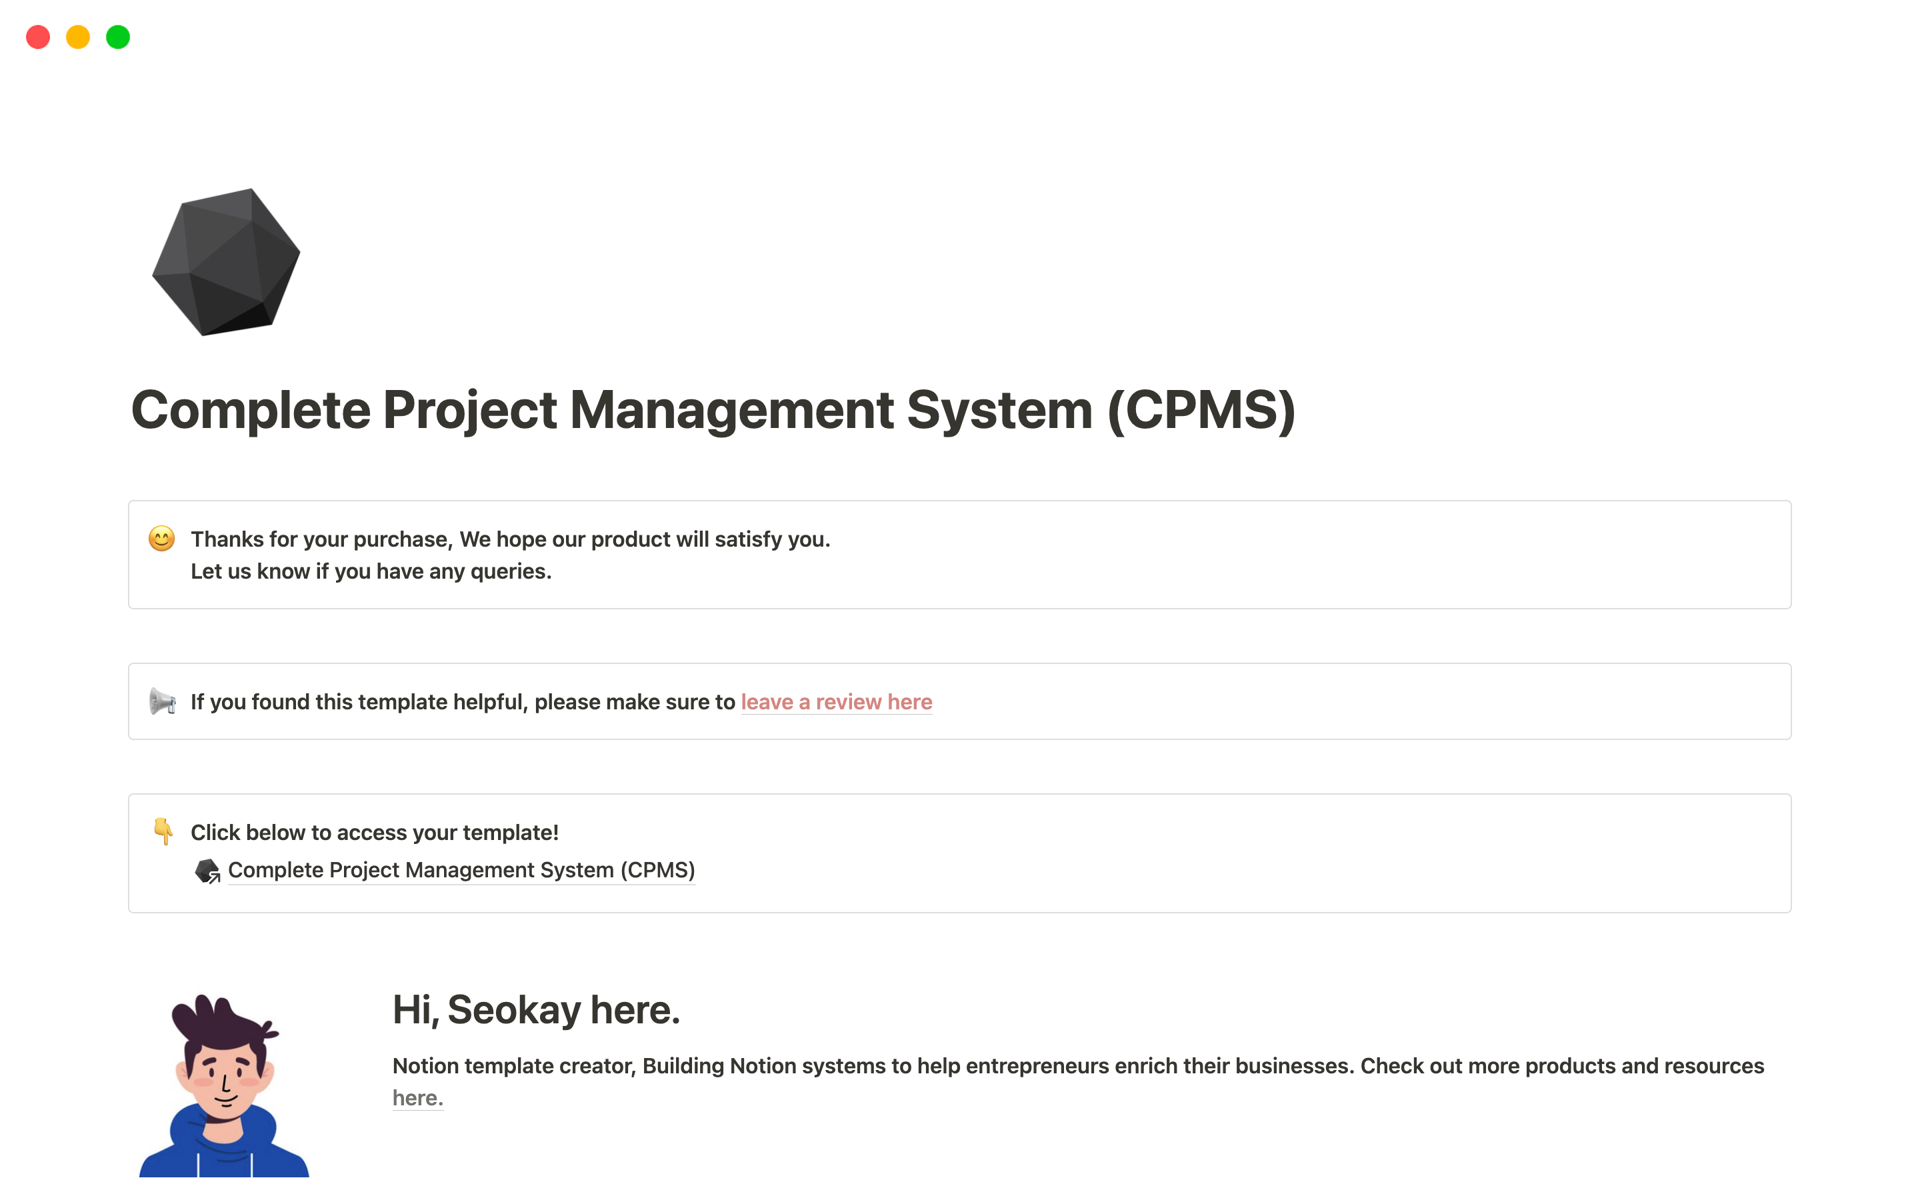 Mallin esikatselu nimelle Complete Project Management System (CPMS) 